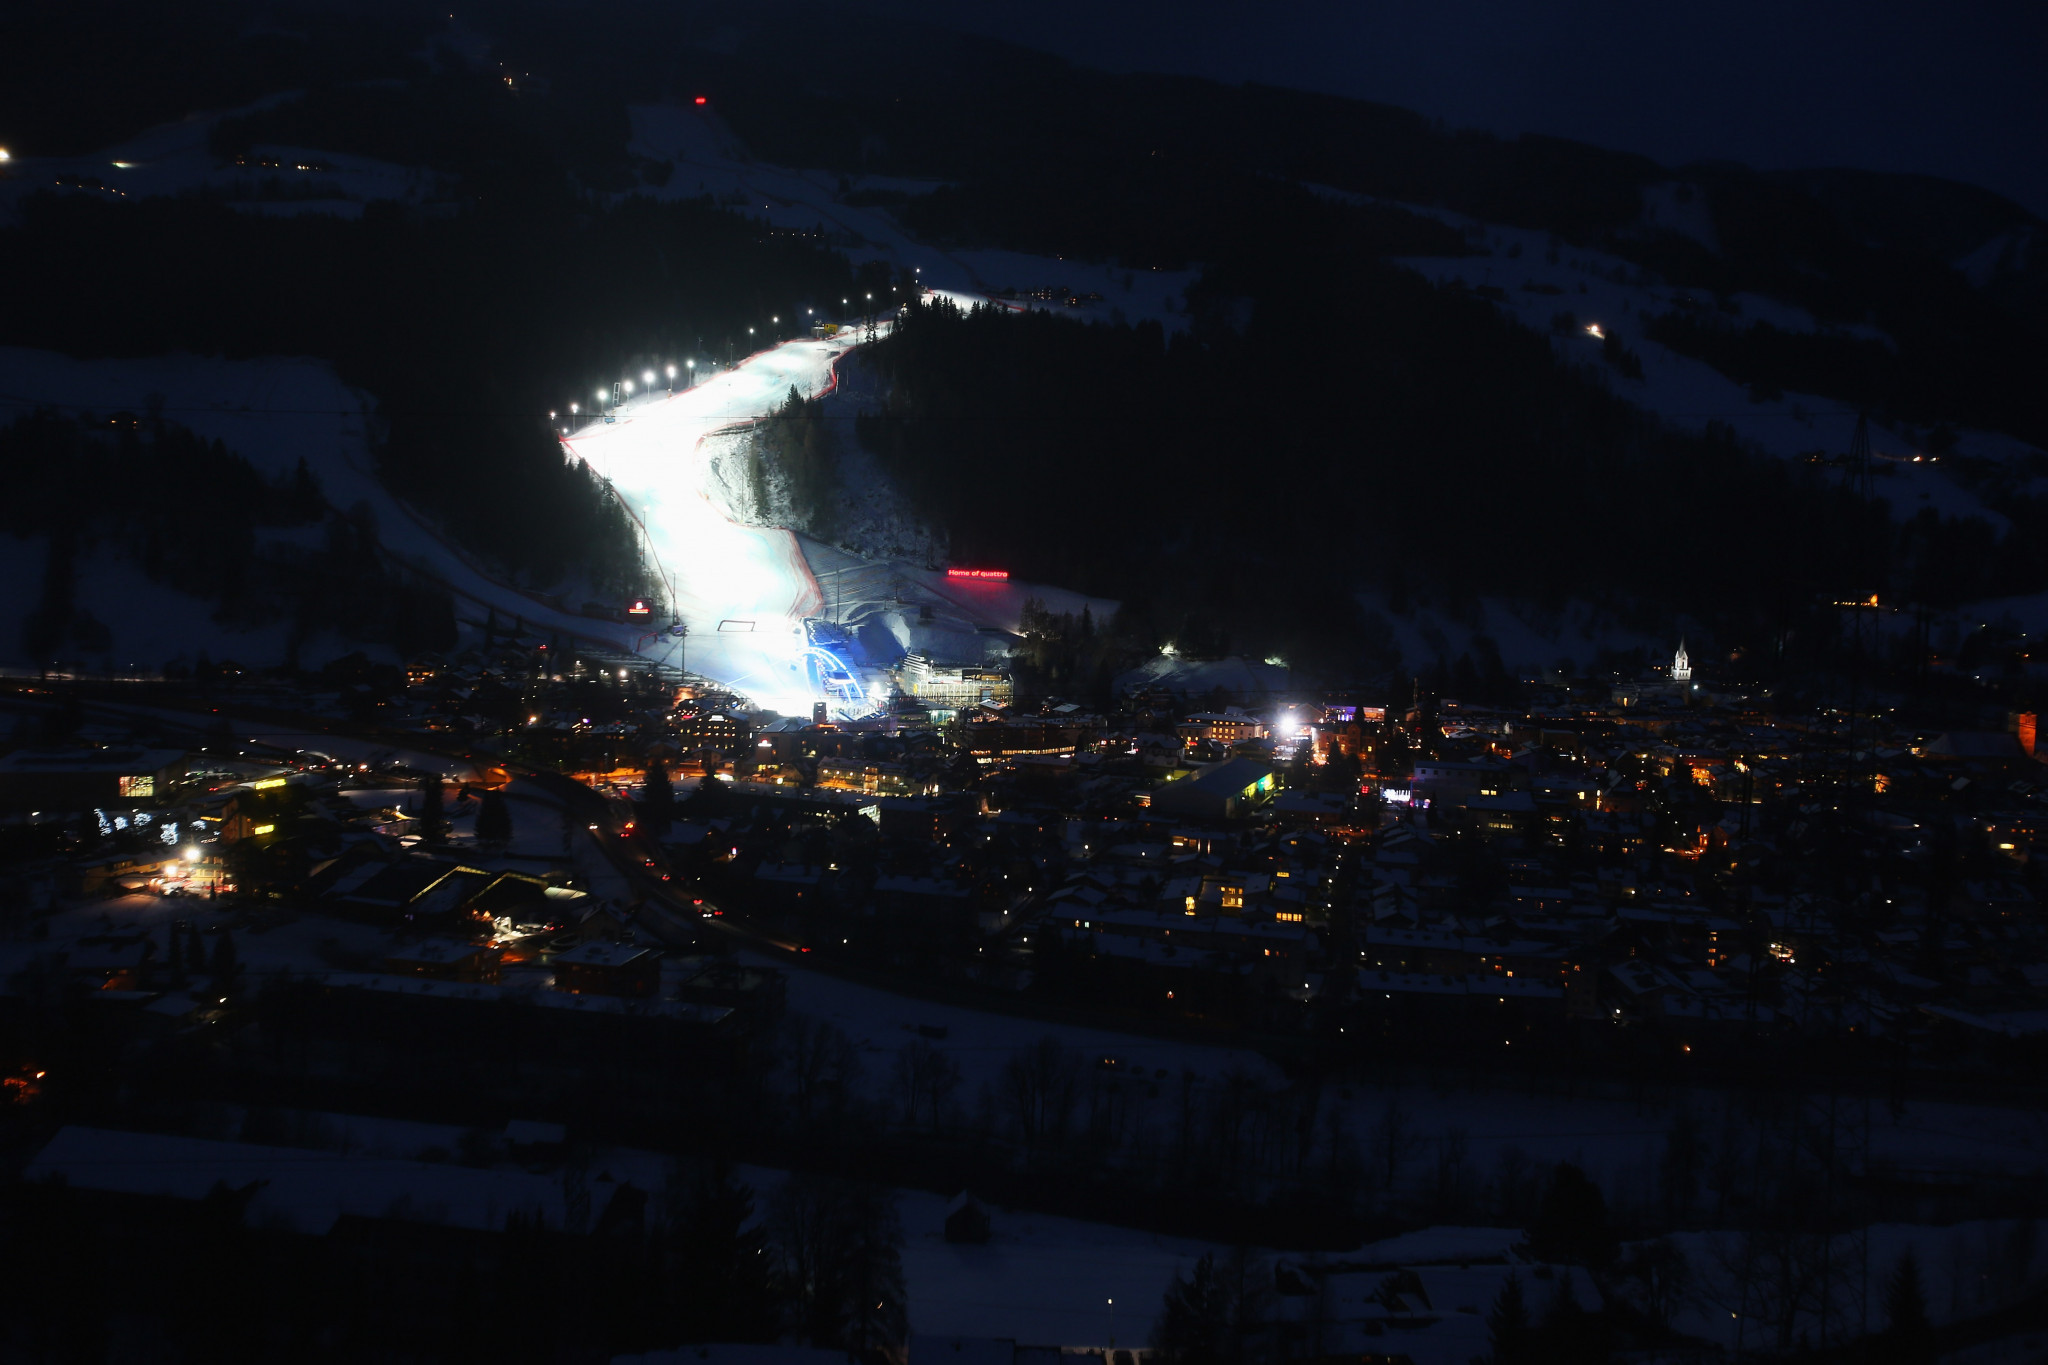 Graz and Schladming considering mounting Austrian 2026 Winter Olympic bid